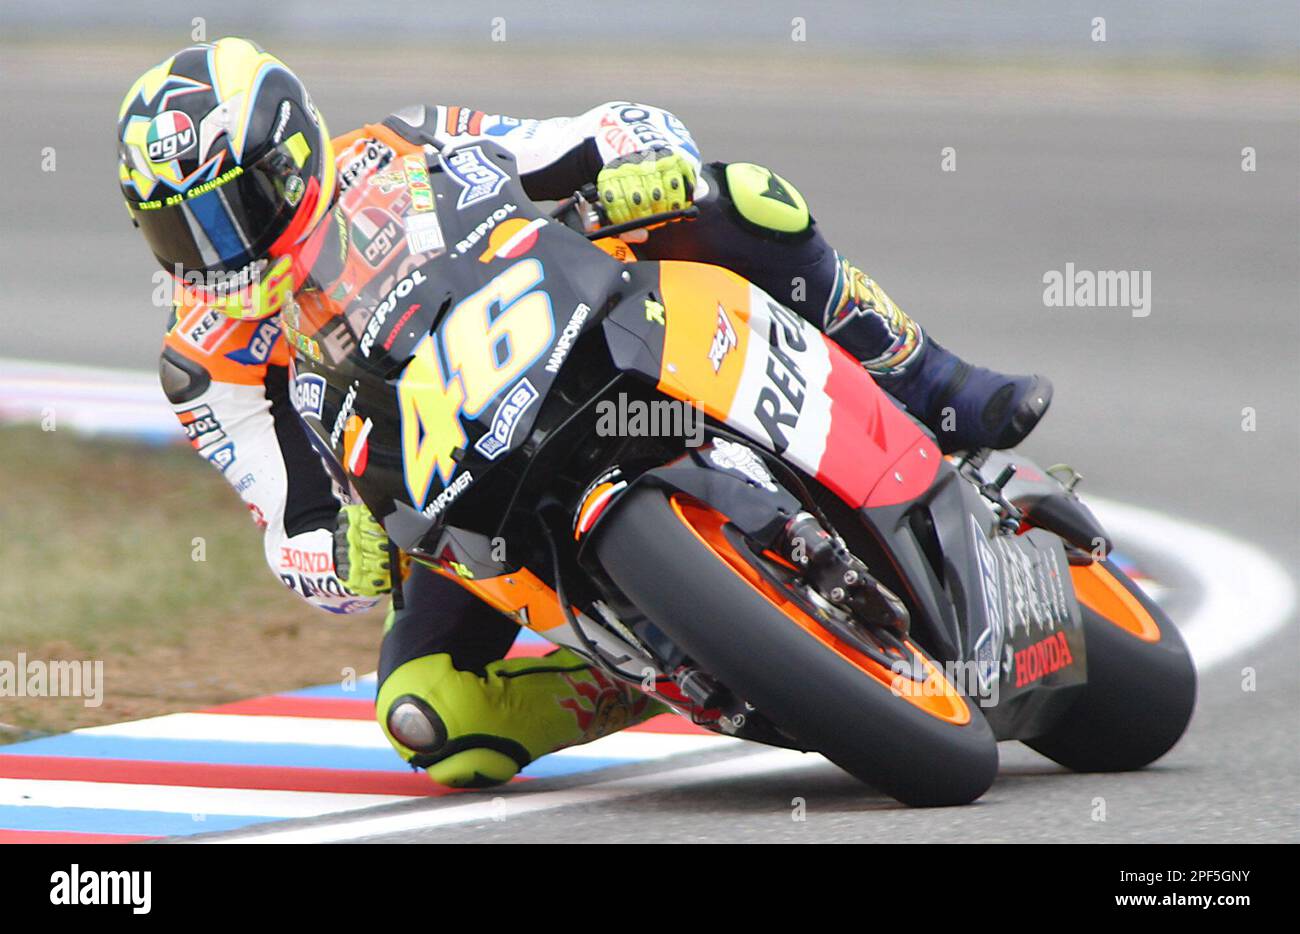 Moto GP rider and overall leader Valentino Rossi from Italy speeds up  during the first free practice for the Czech Motorcycling Grand Prix in Brno,  Czech Republic, on Friday, Aug. 15, 2003.